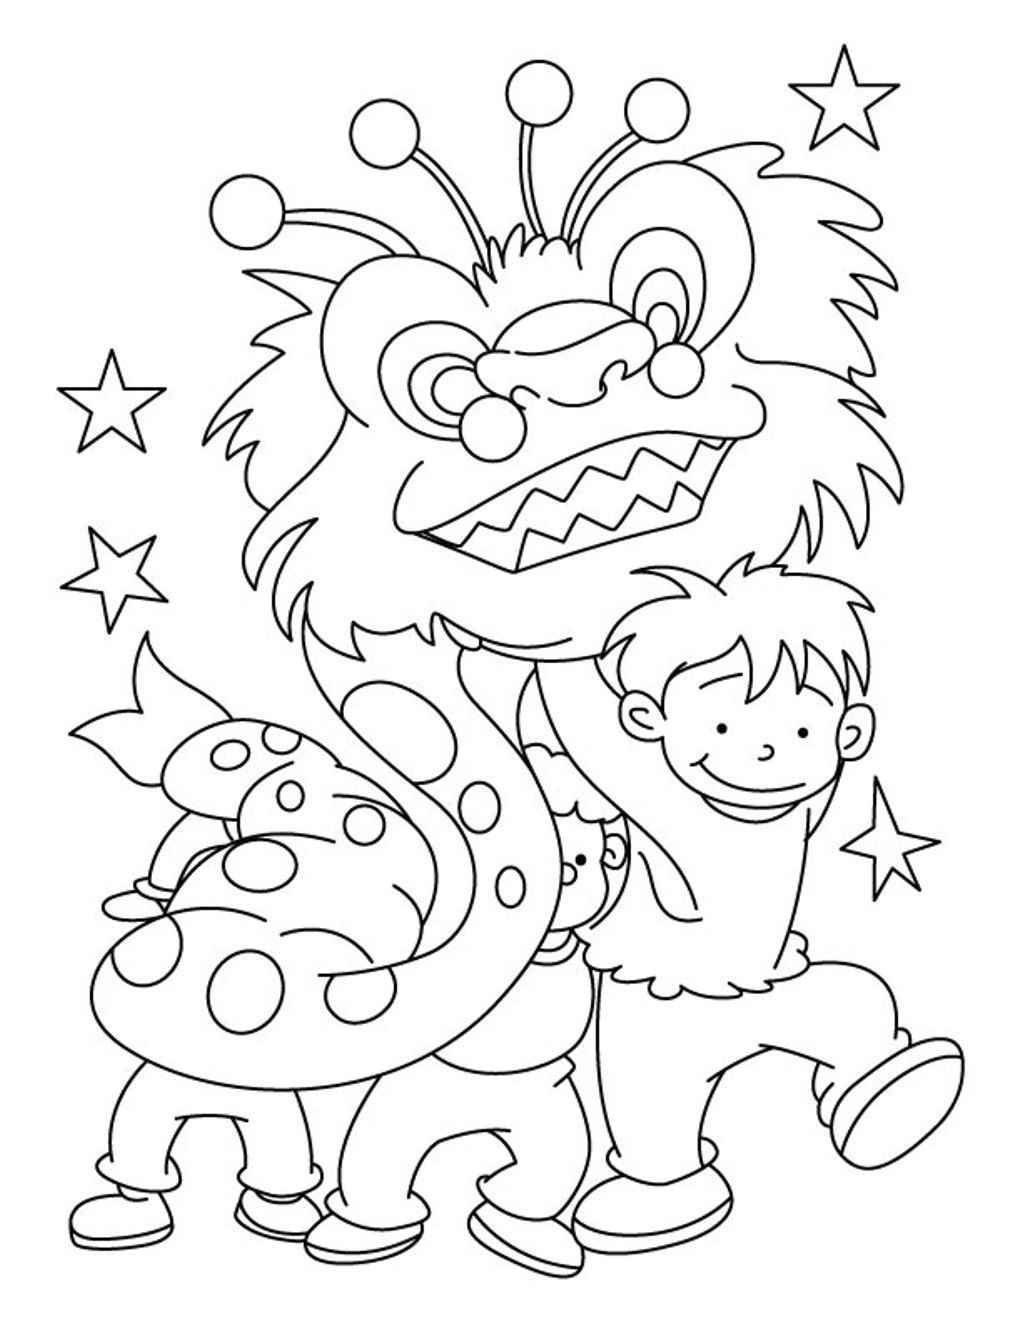 Dragon Chinese New Year Coloring Pages | New Year Coloring pages